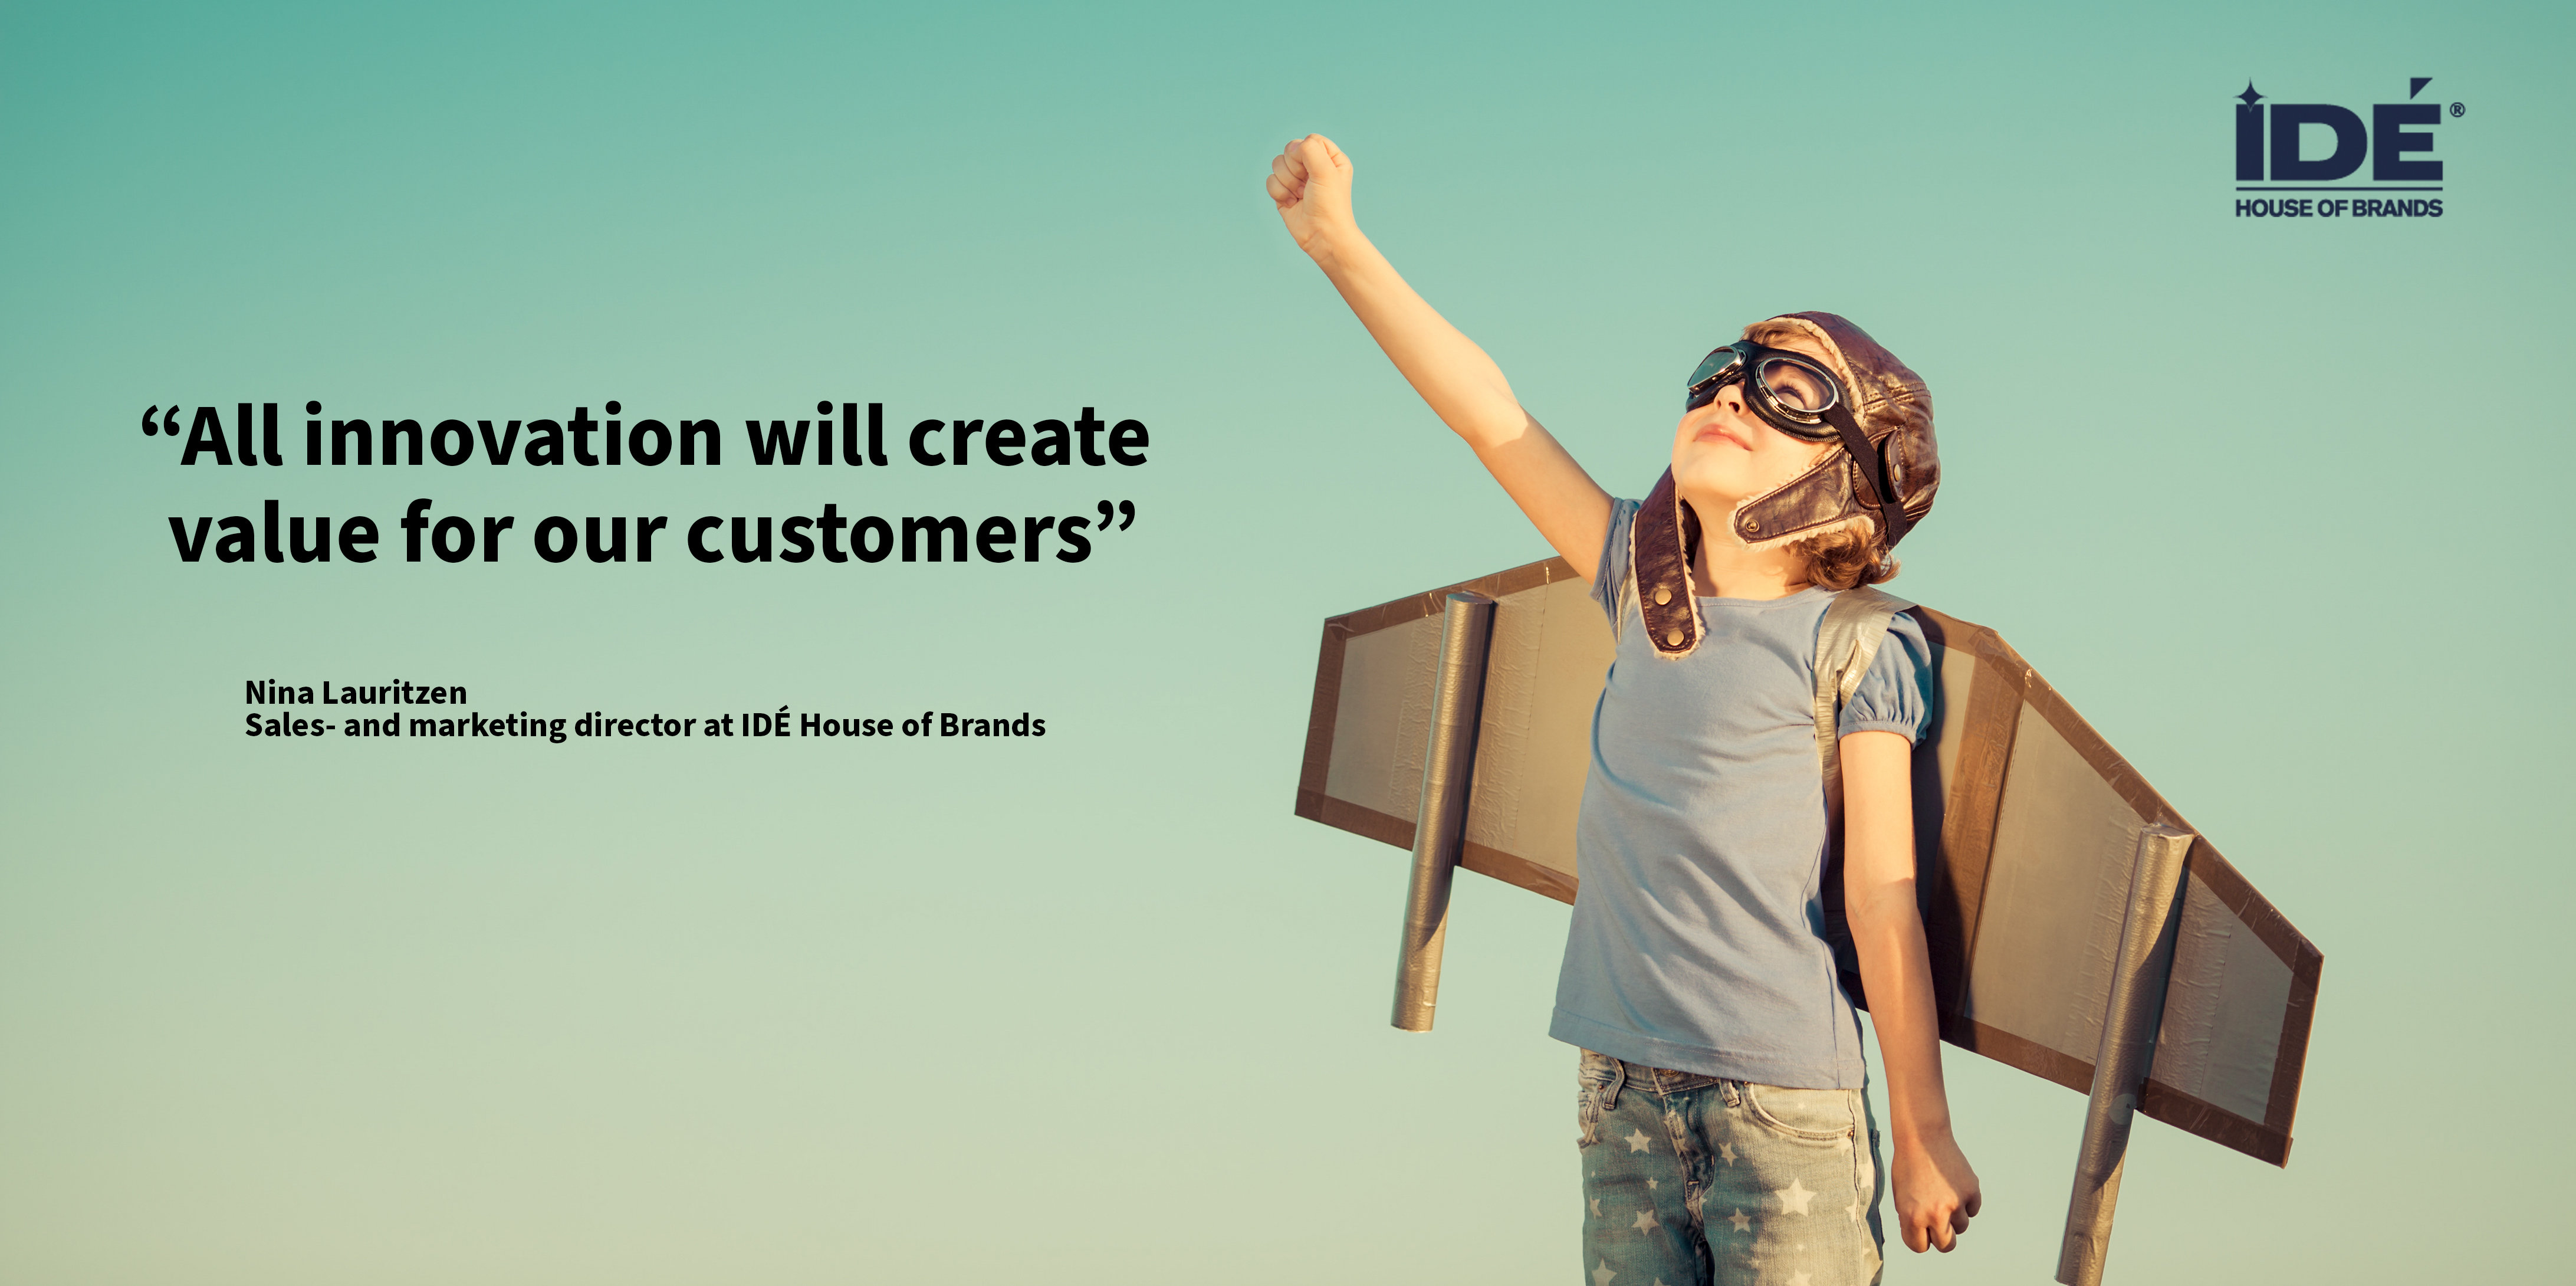 Picture with text: "All innovation must create value for our customers"